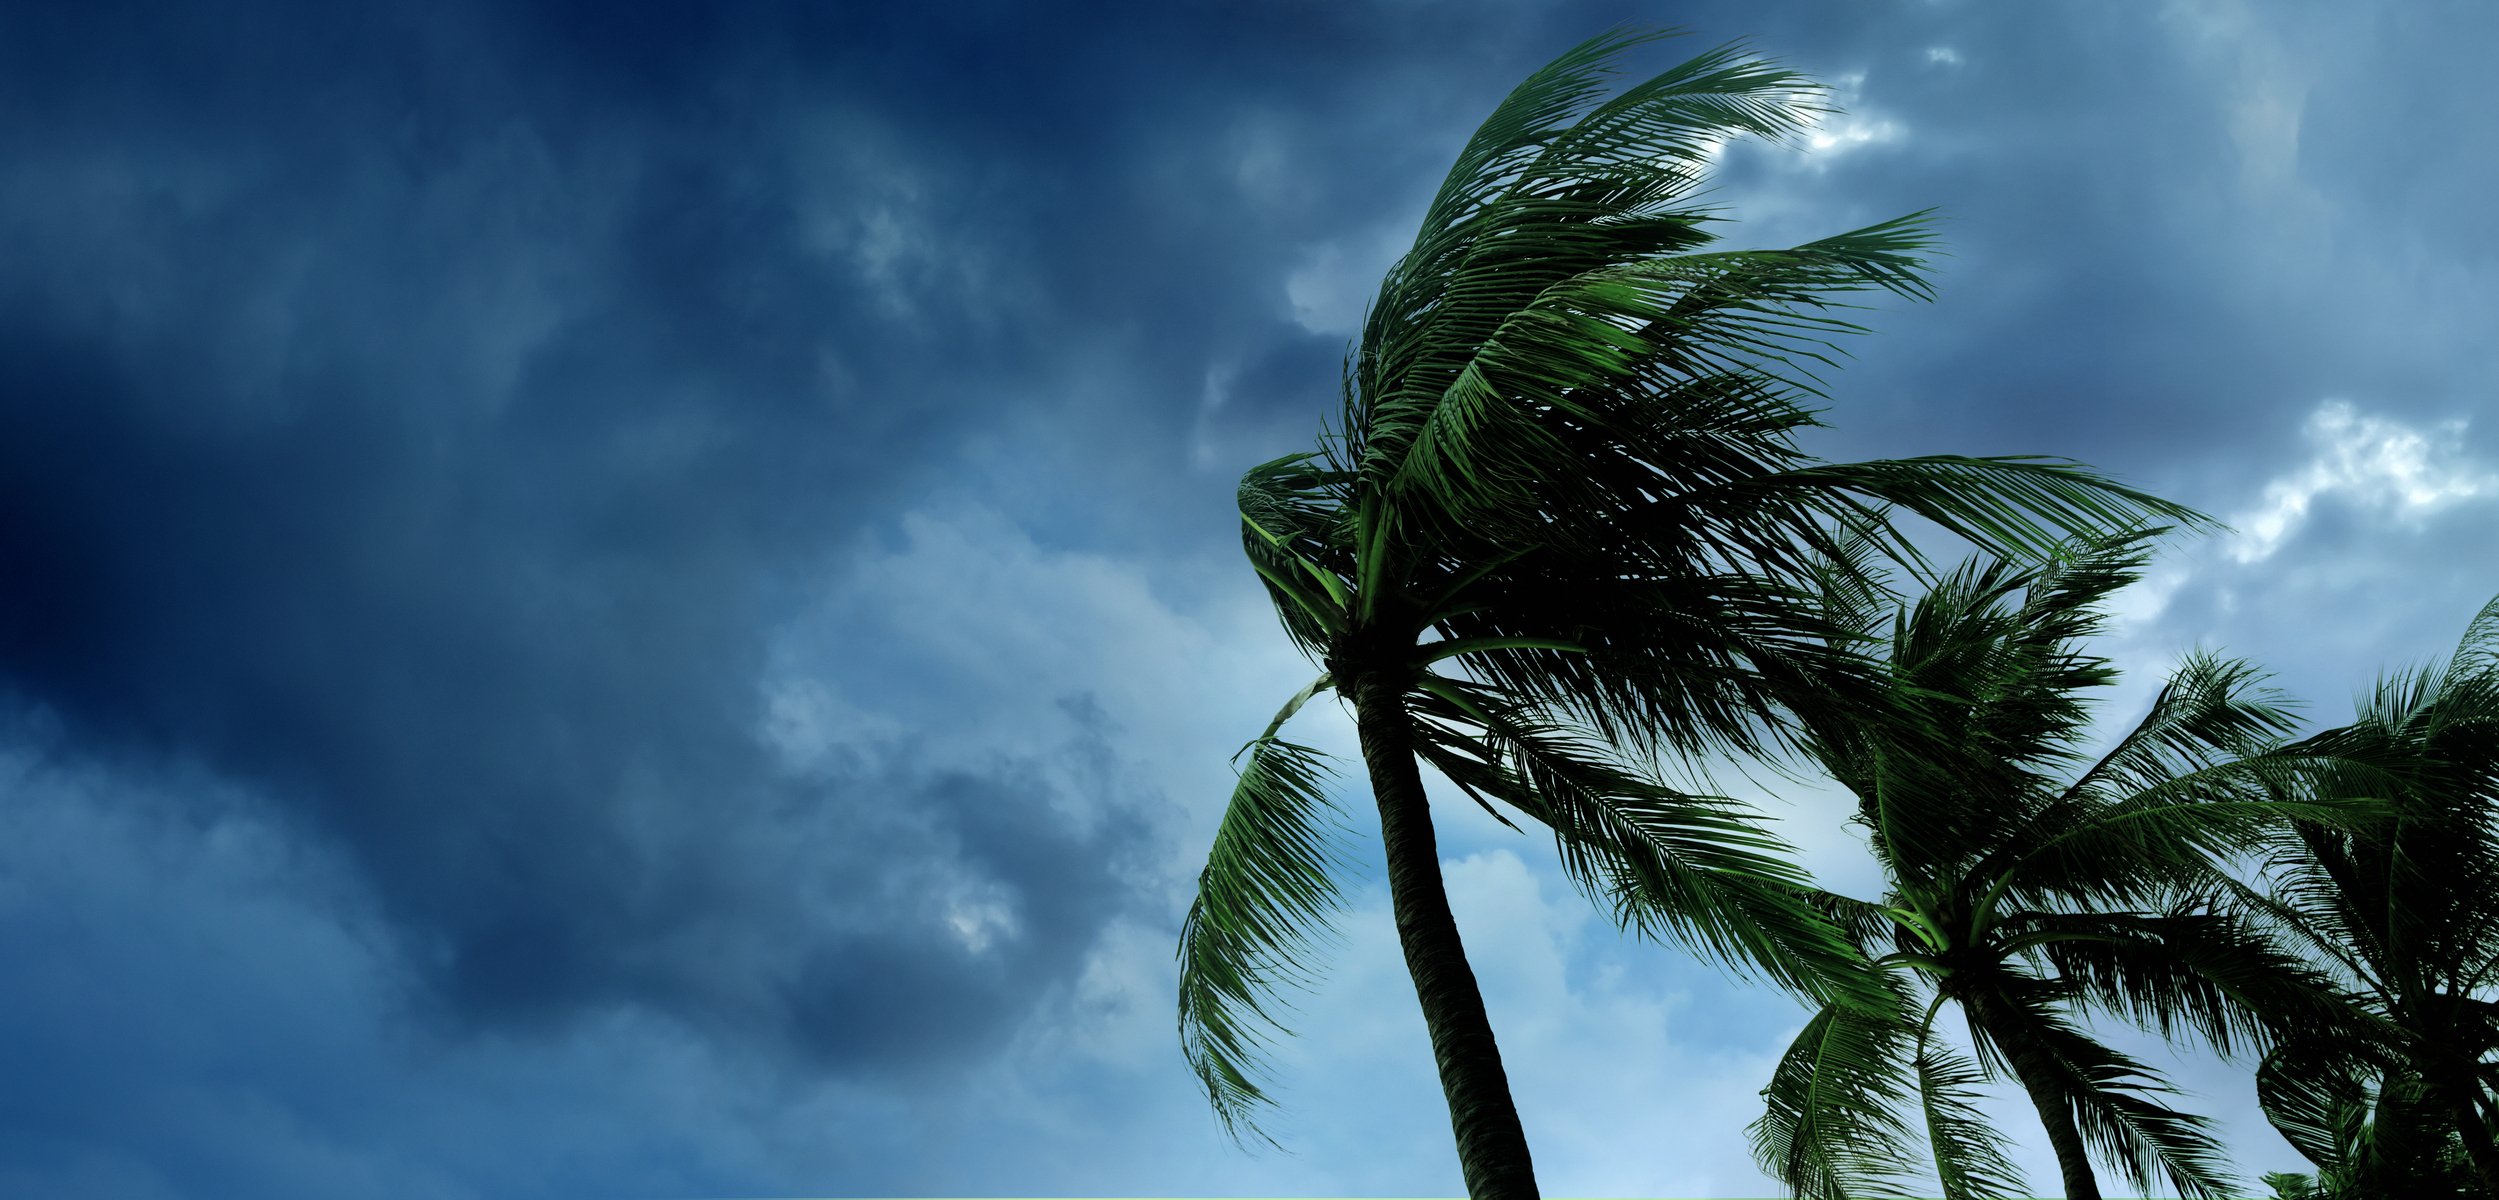 Palm tree branches bending as storm clouds approach